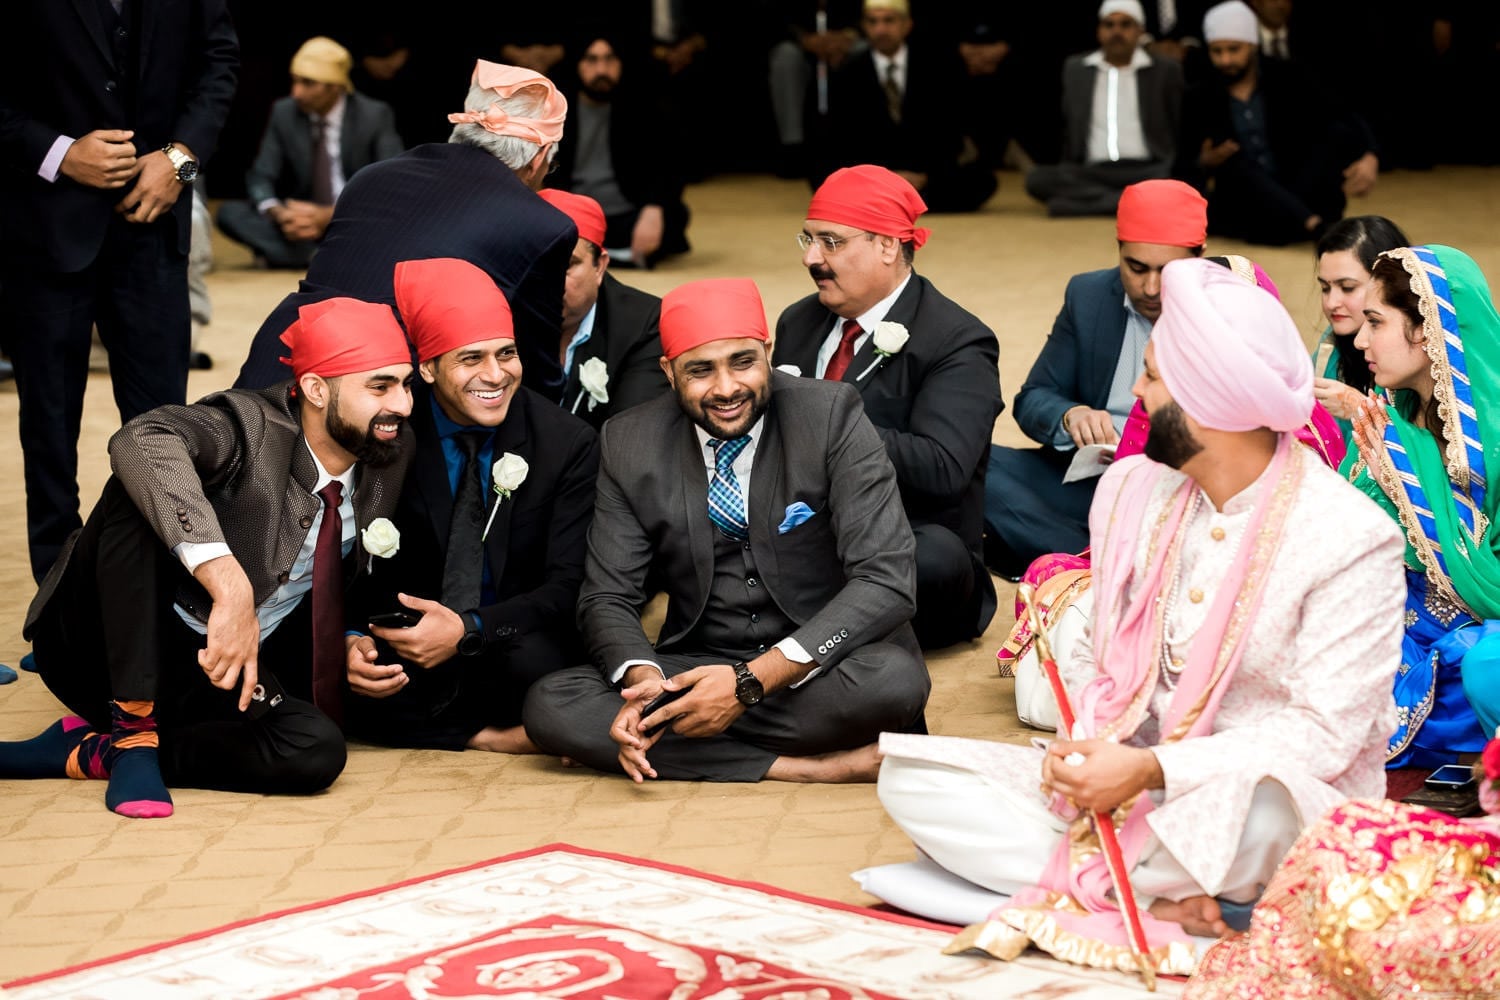 Indian groomsmen at the temple | Indian wedding photography Vancouver